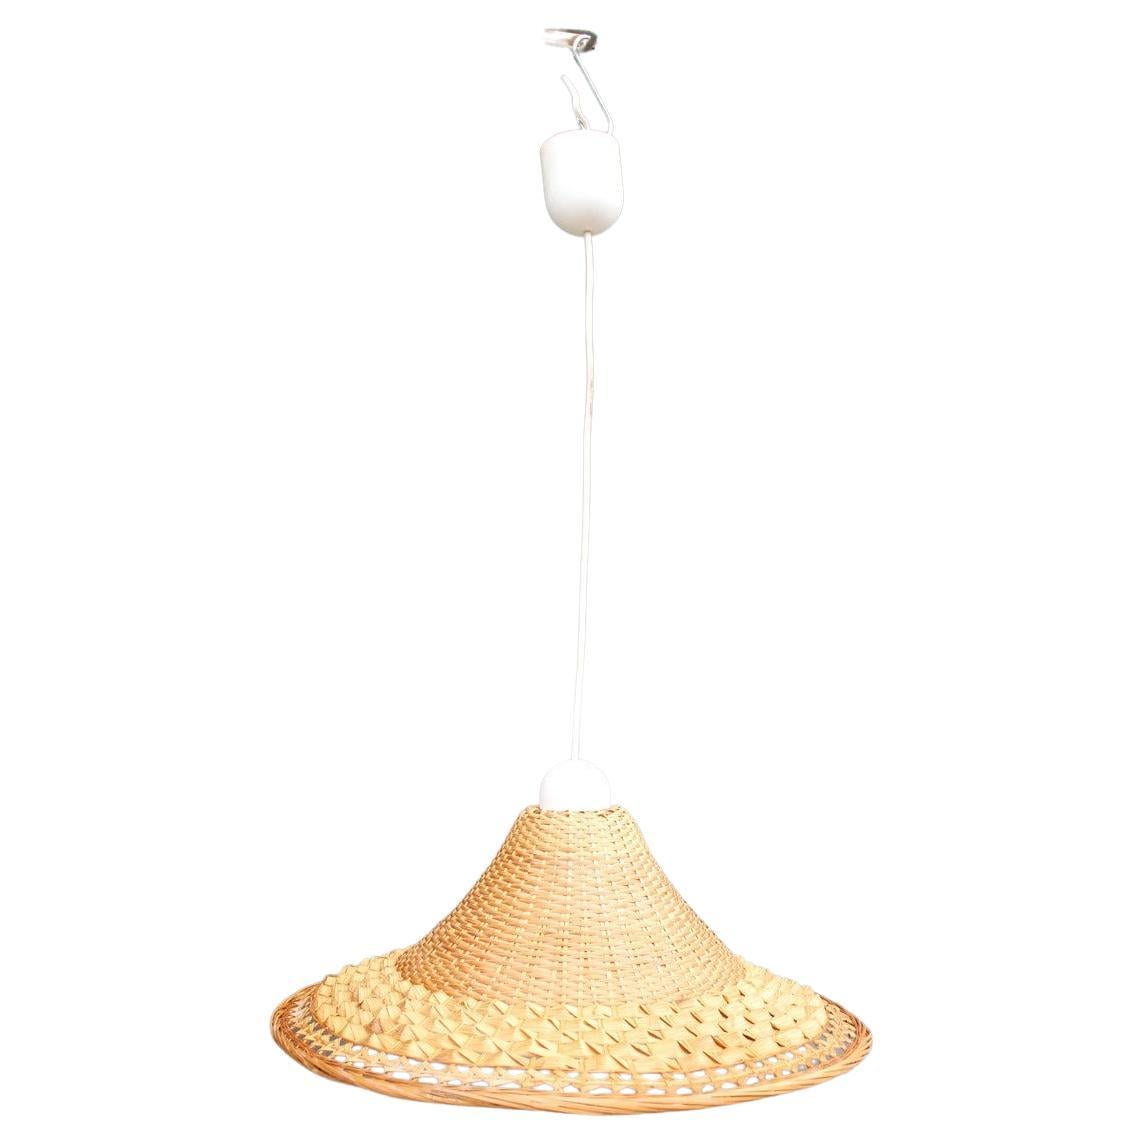 Sardinian Dome Chandelier Hand-Woven Straw Midcentuy Italy Design For Sale